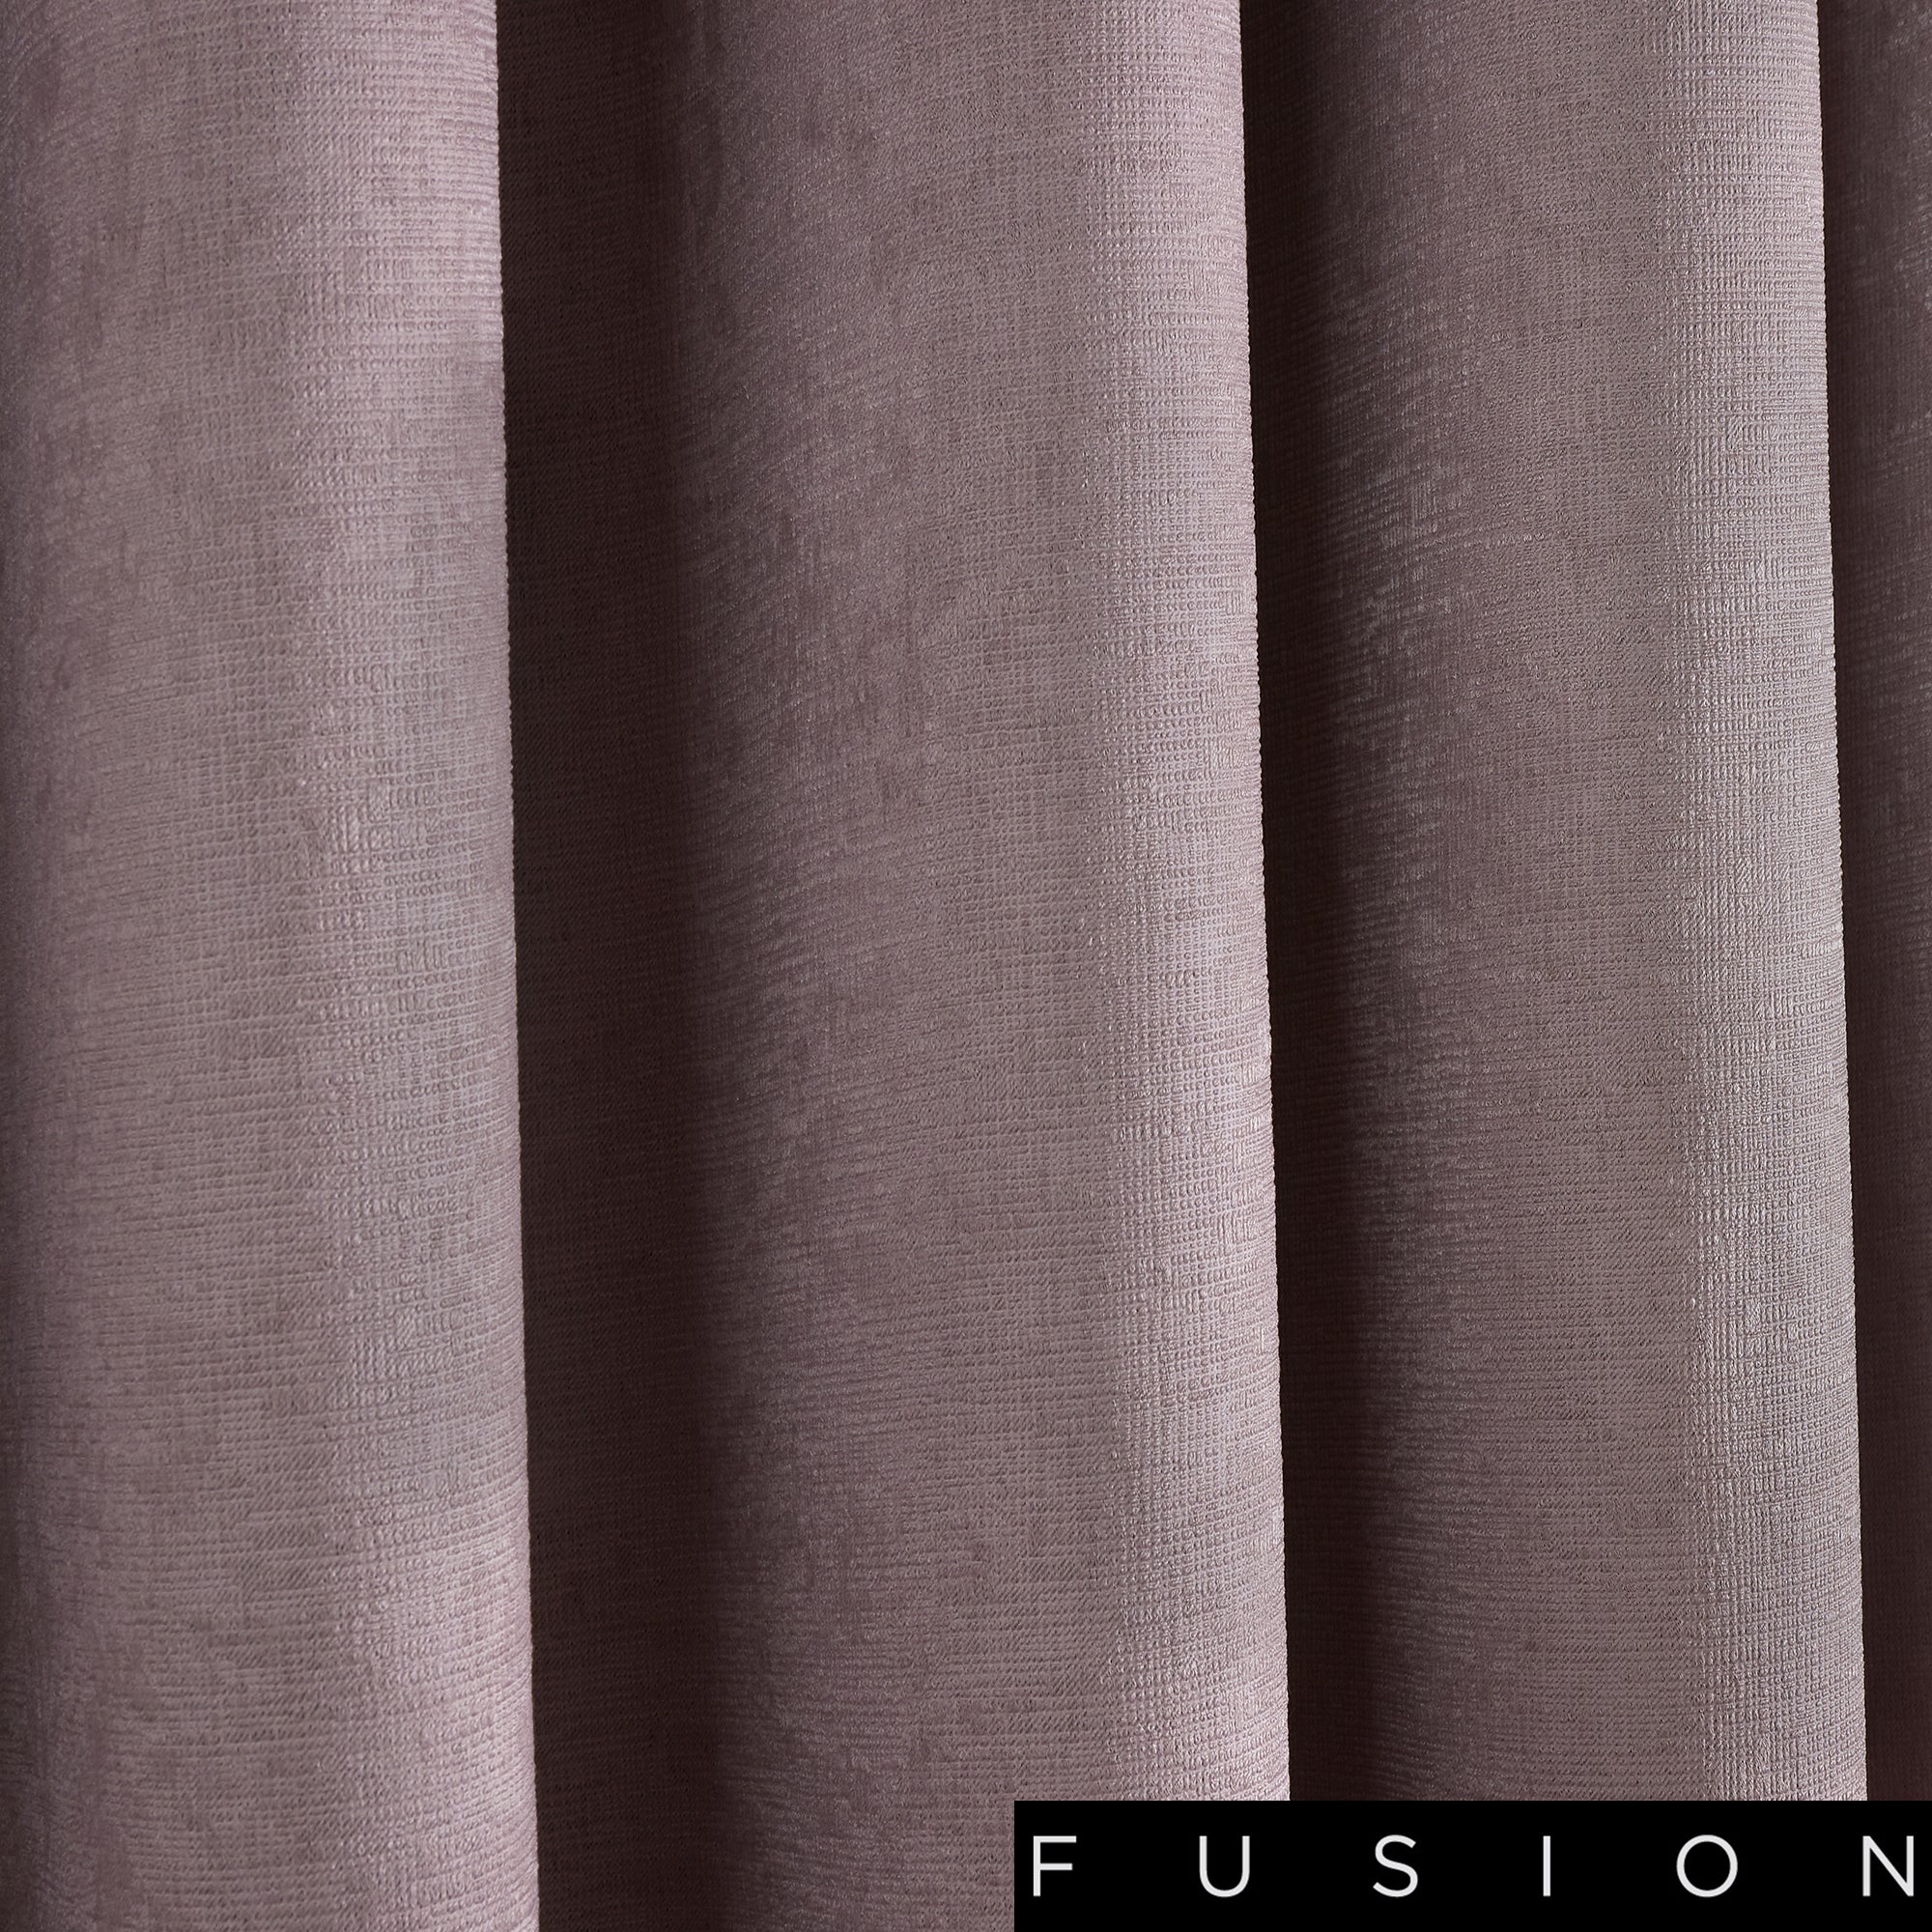 Strata - Blockout Eyelet Curtains in Blush - by Fusion